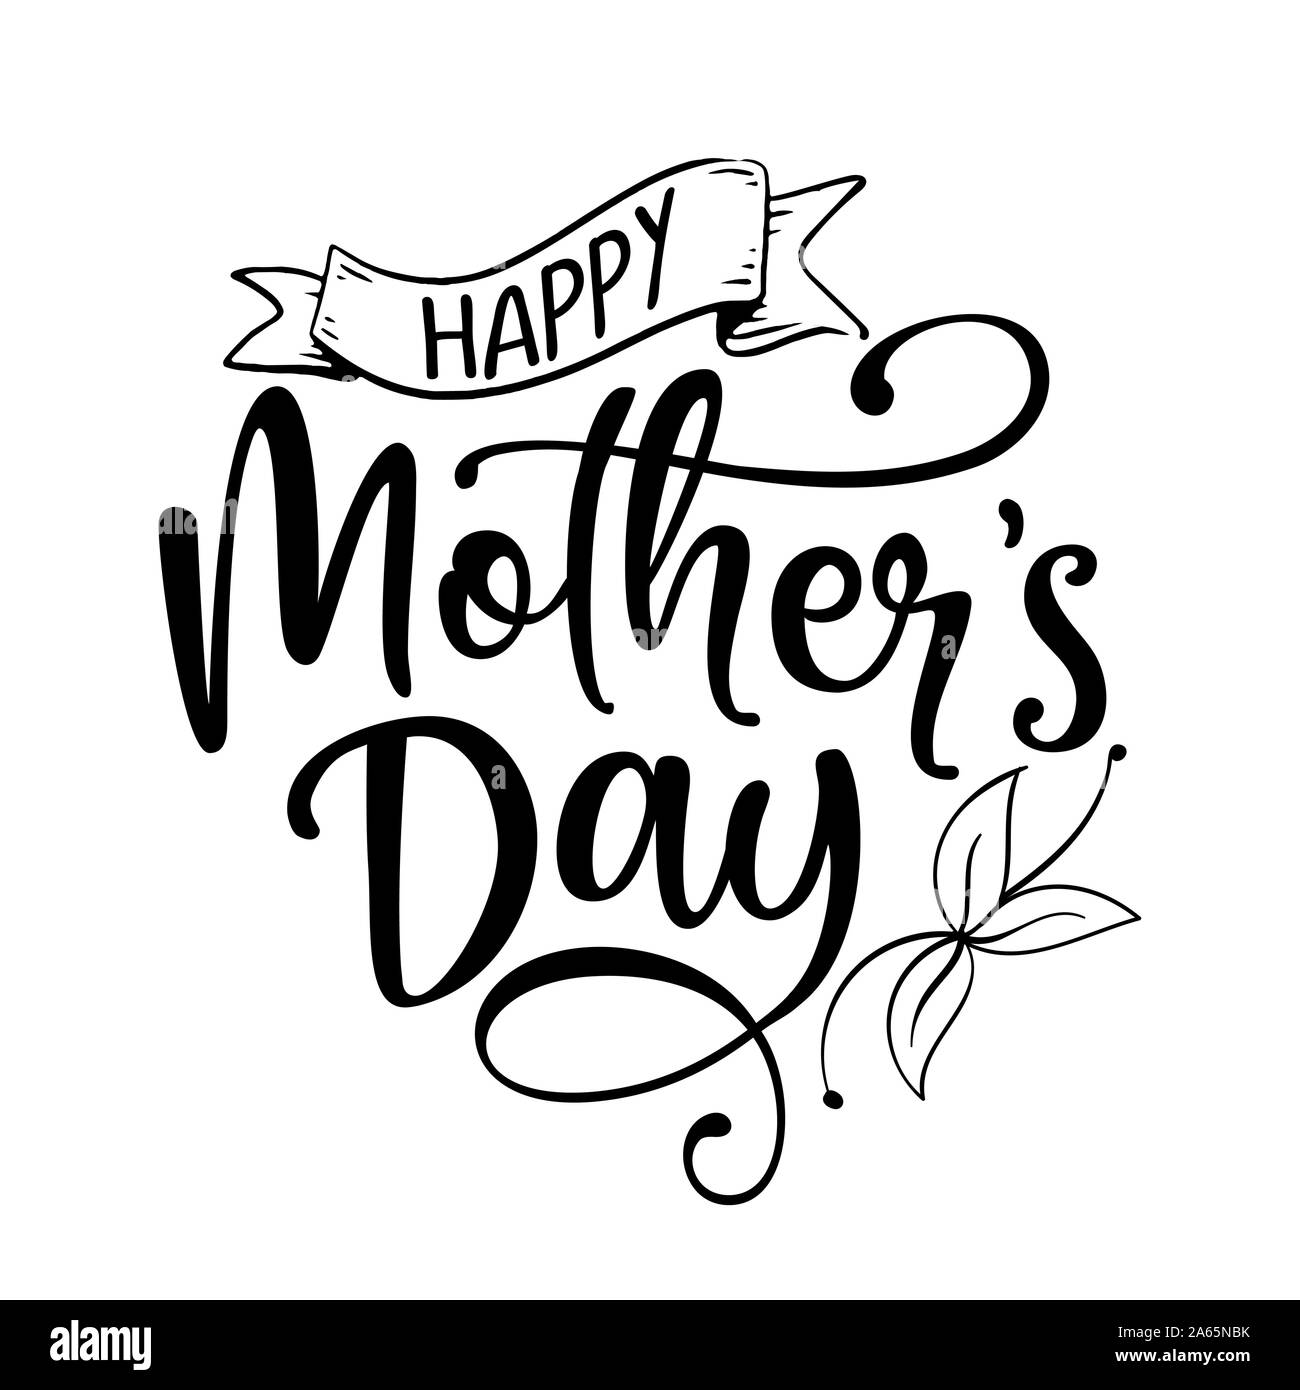 Happy Mother's Day -  Funny hand drawn calligraphy text. Good for fashion shirts, poster, gift, or other printing press. Motivation quote. Stock Vector